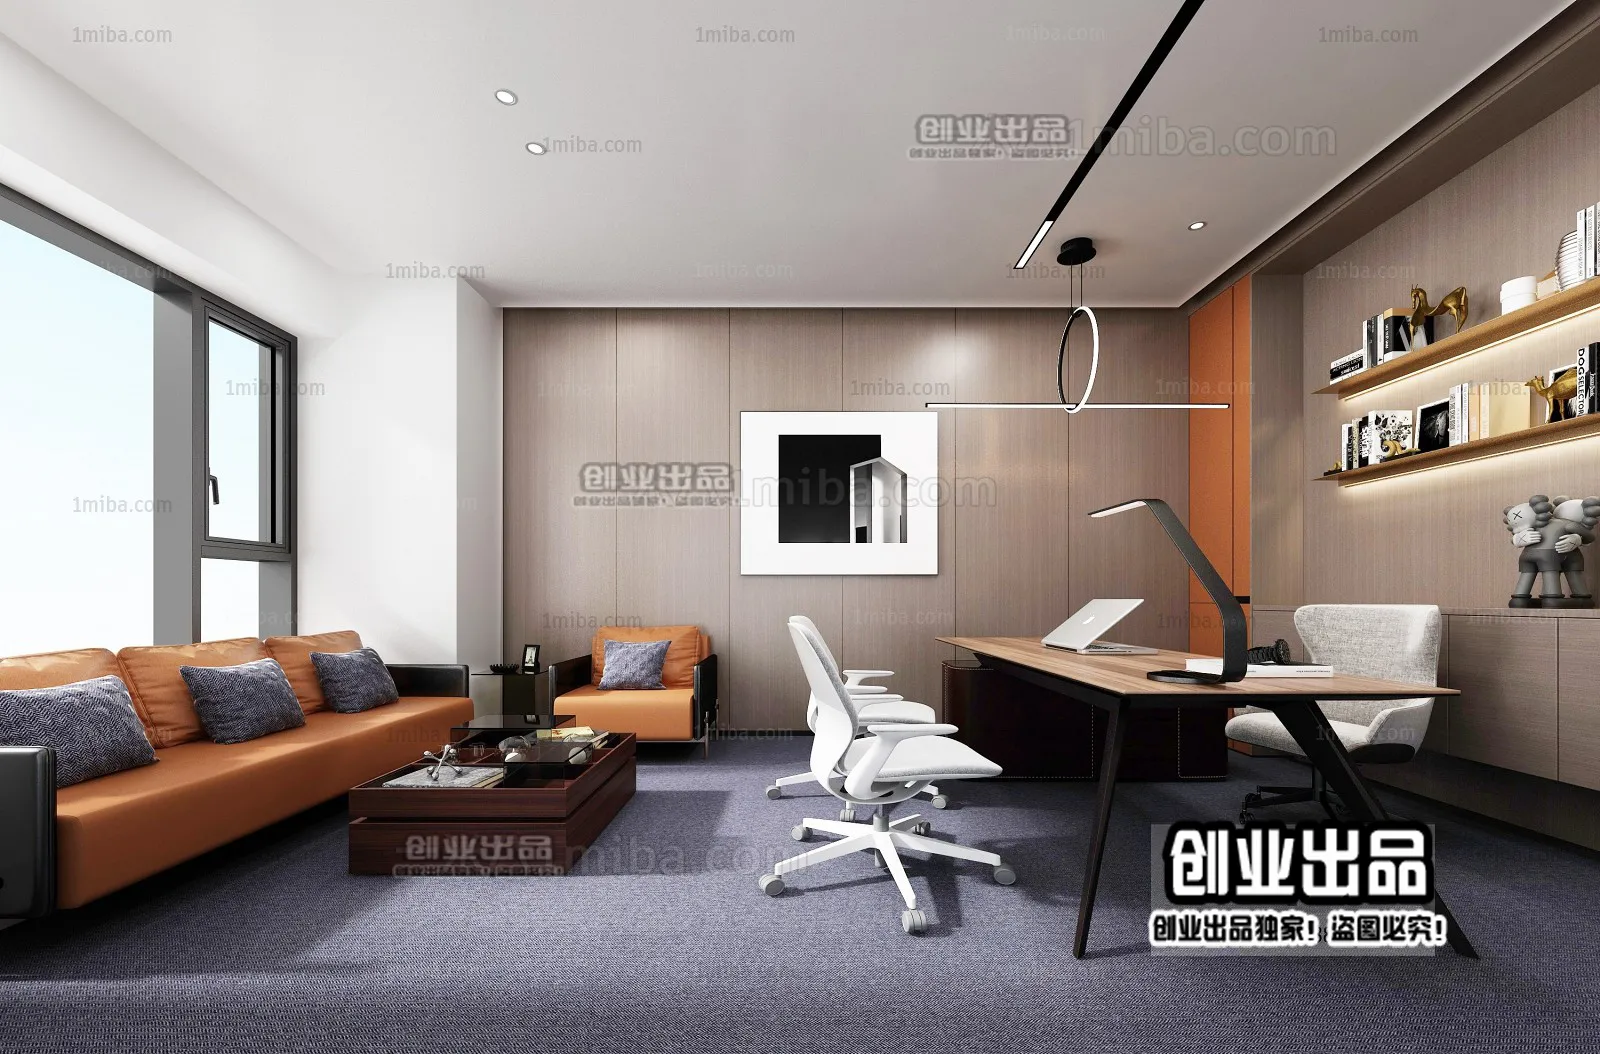 3D OFFICE INTERIOR (VRAY) – MANAGER ROOM 3D SCENES – 013